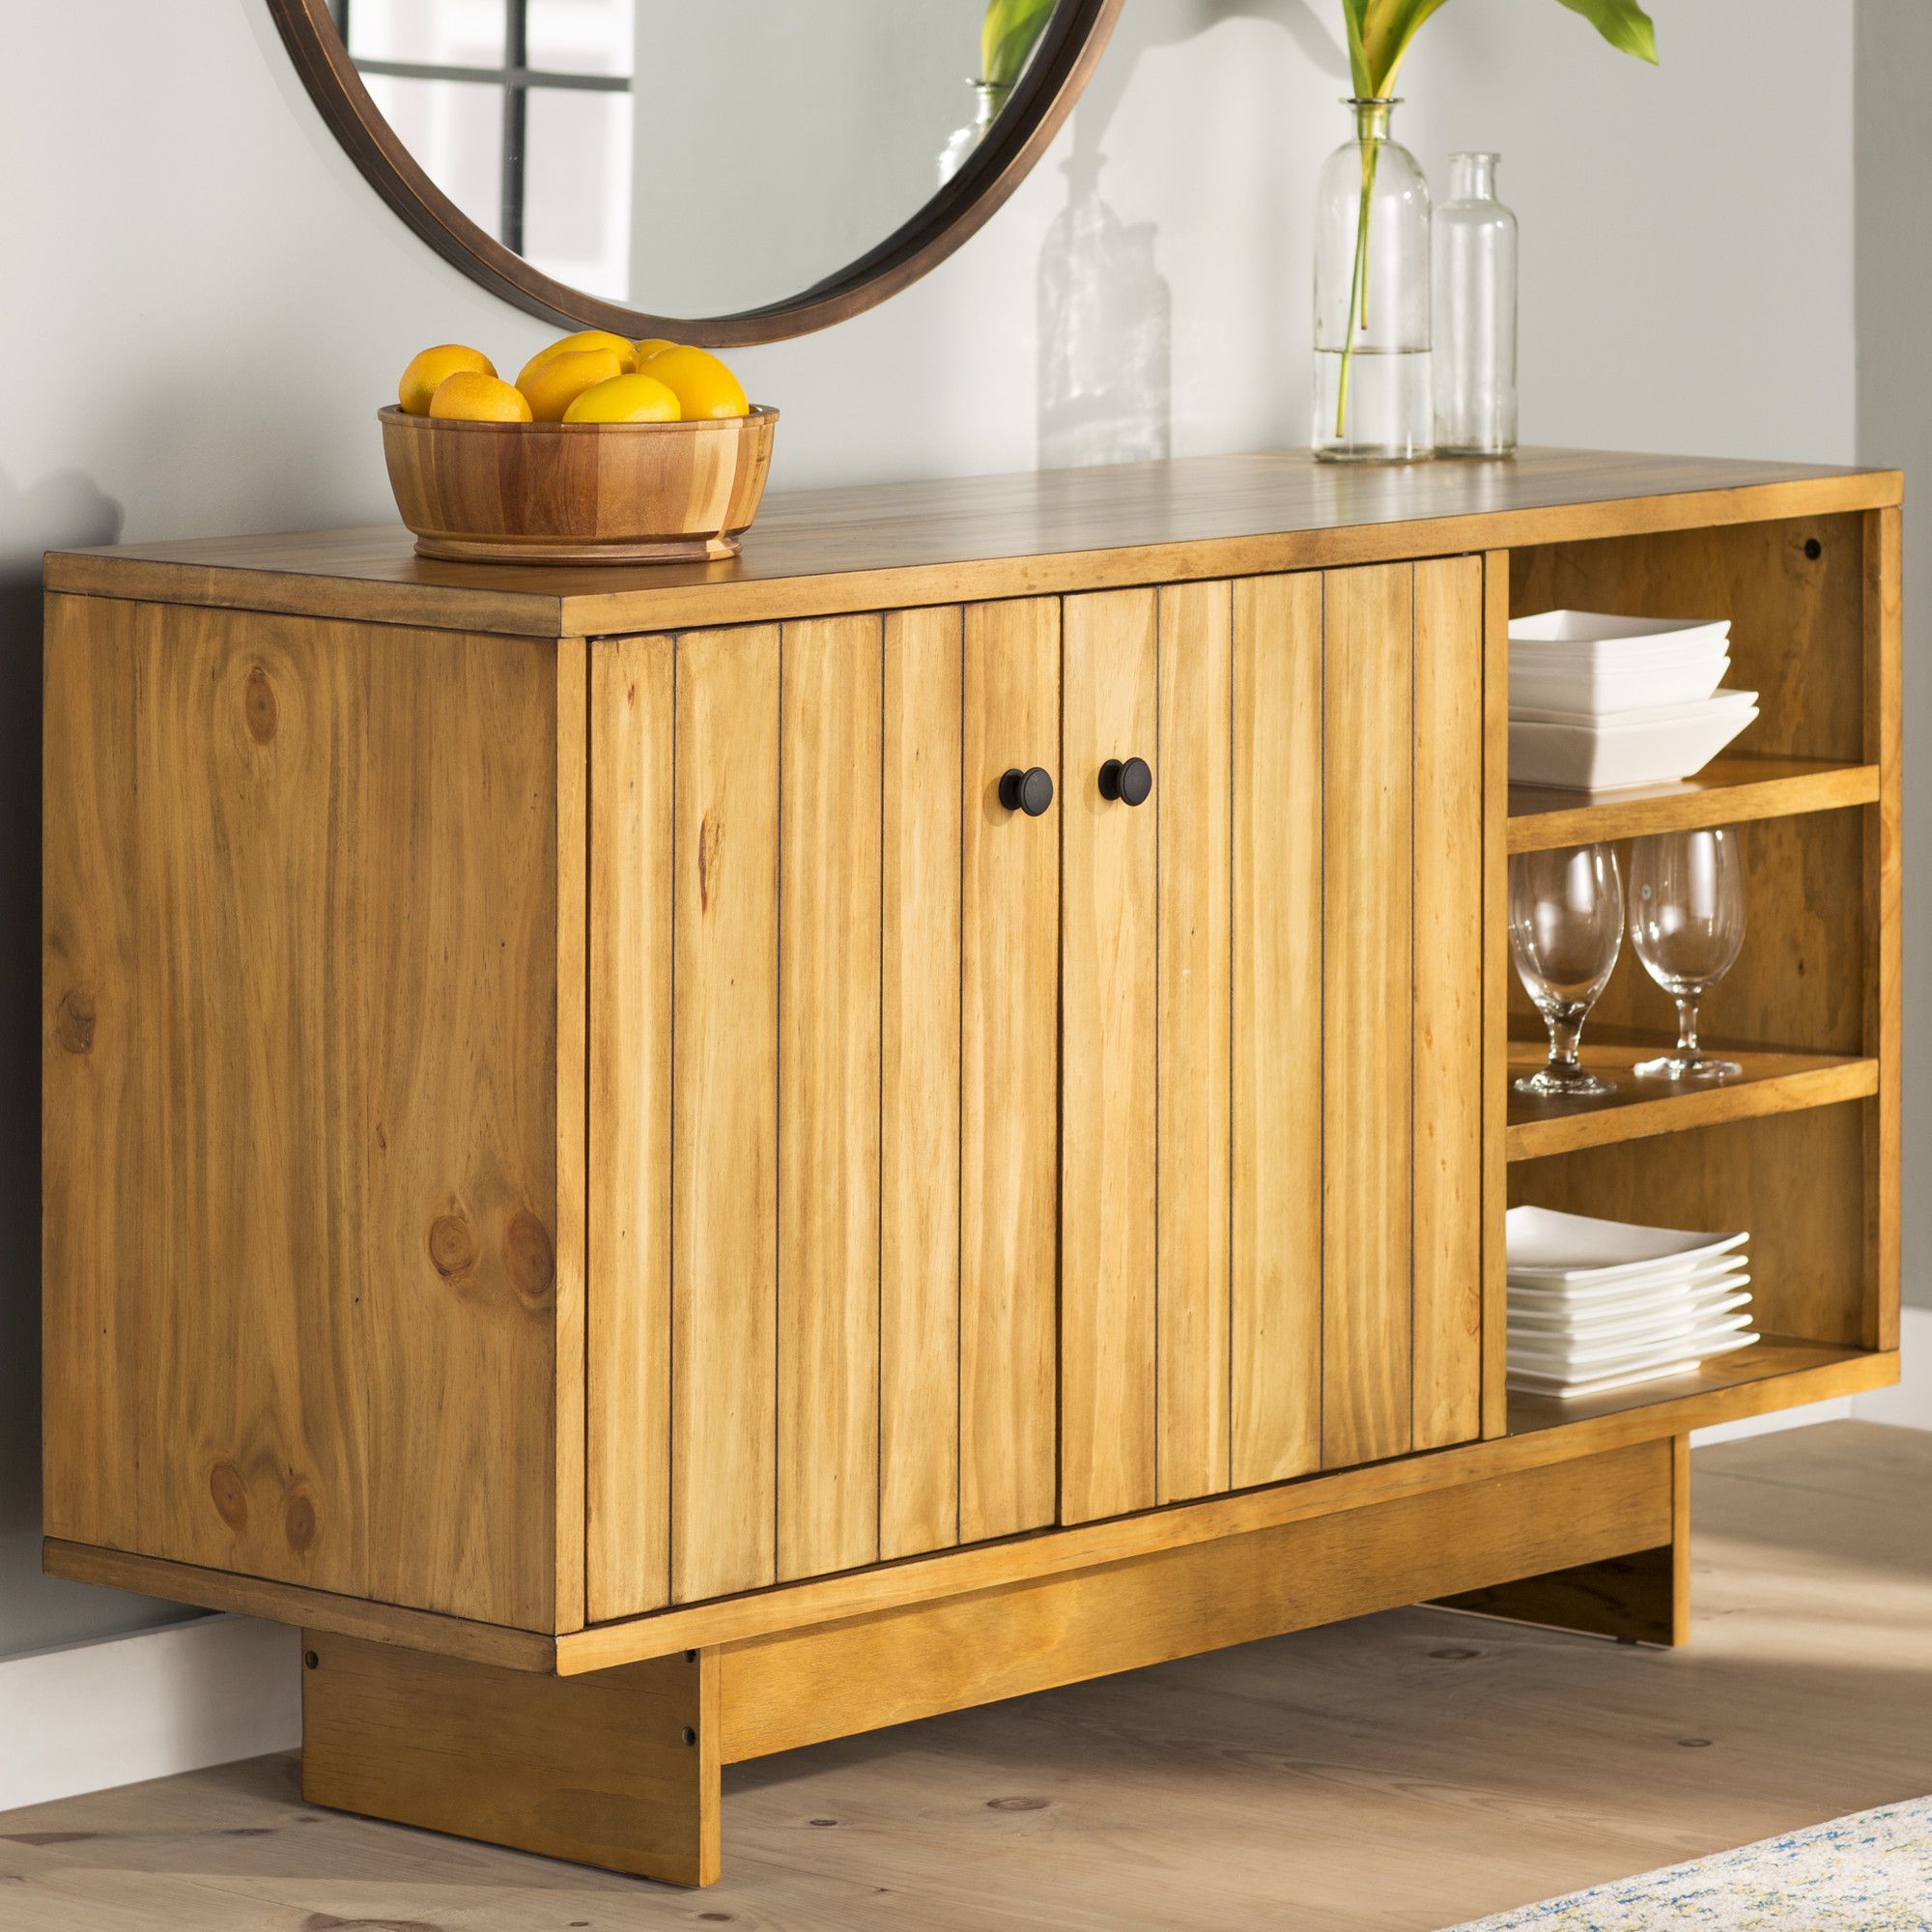 Avenal Sideboard | Products Intended For Recent Avenal Sideboards (Photo 3 of 20)